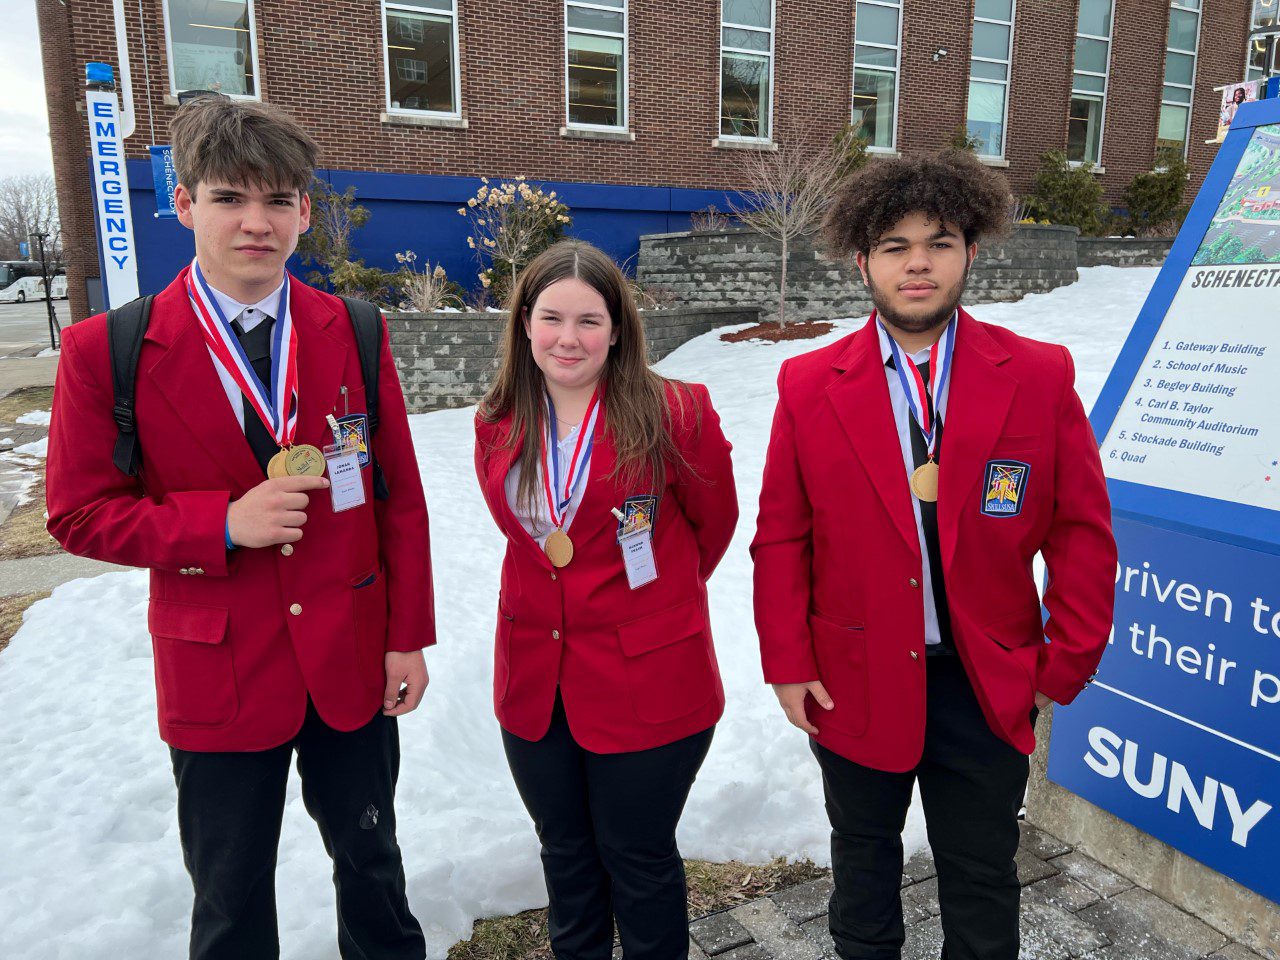 three students wearing red jackets and medals